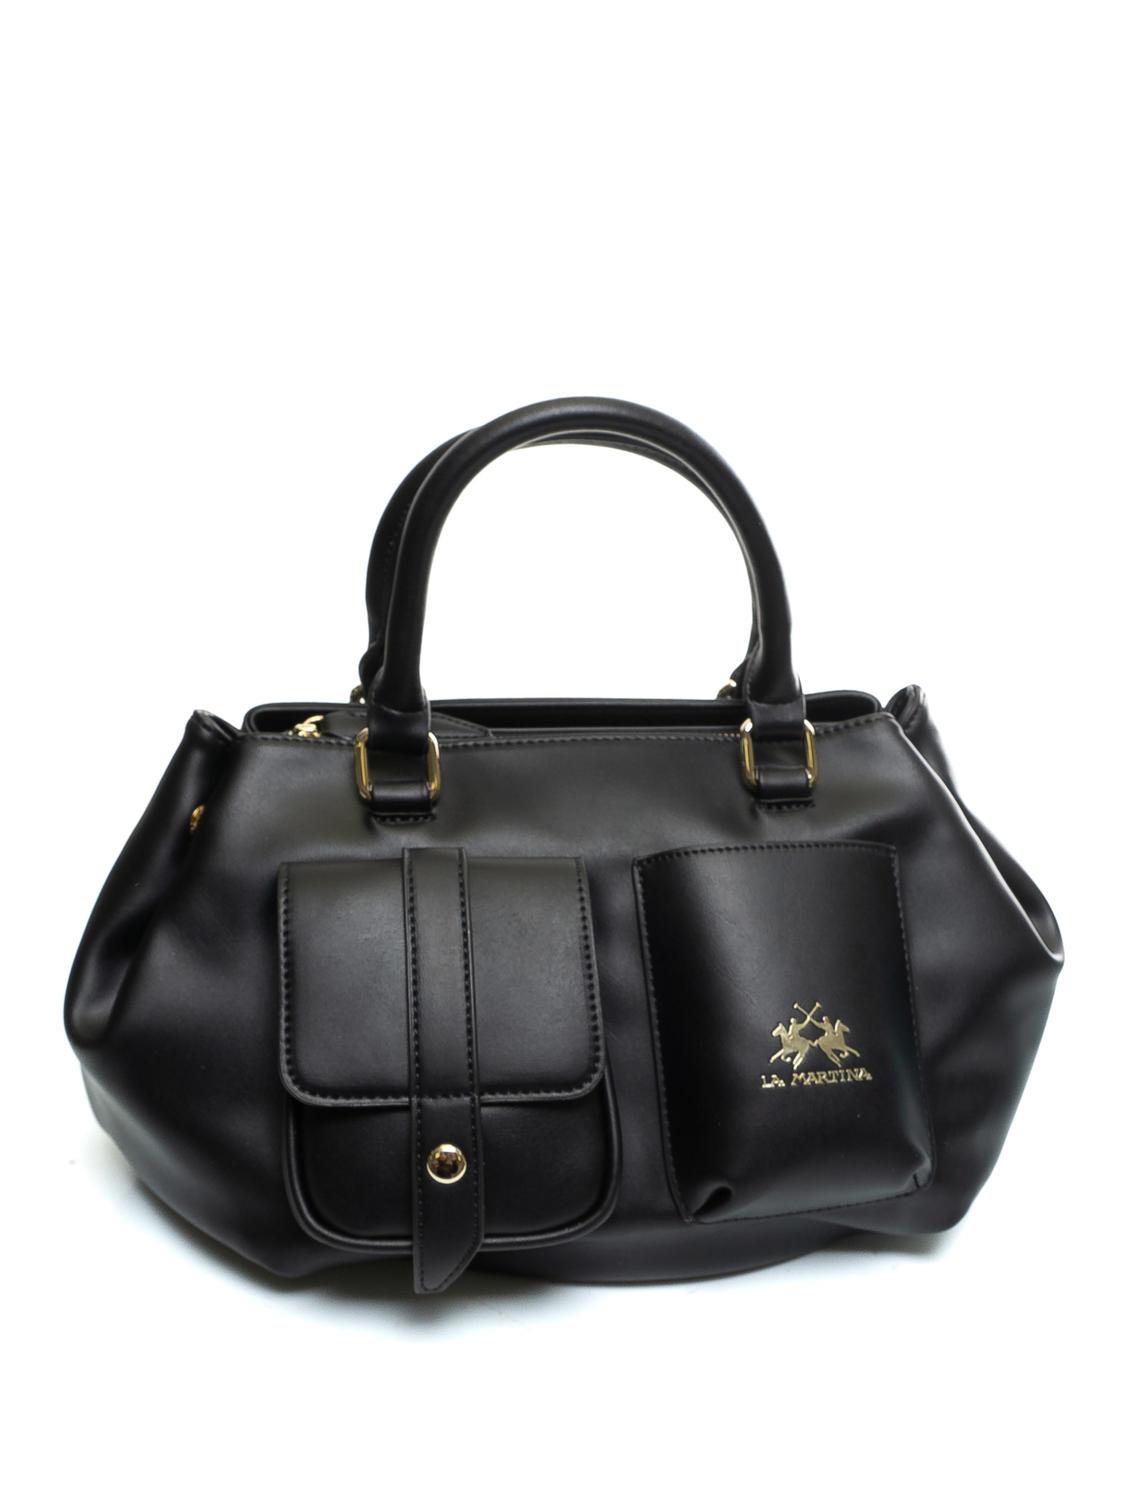 La Martina women's bags: discover the online collection